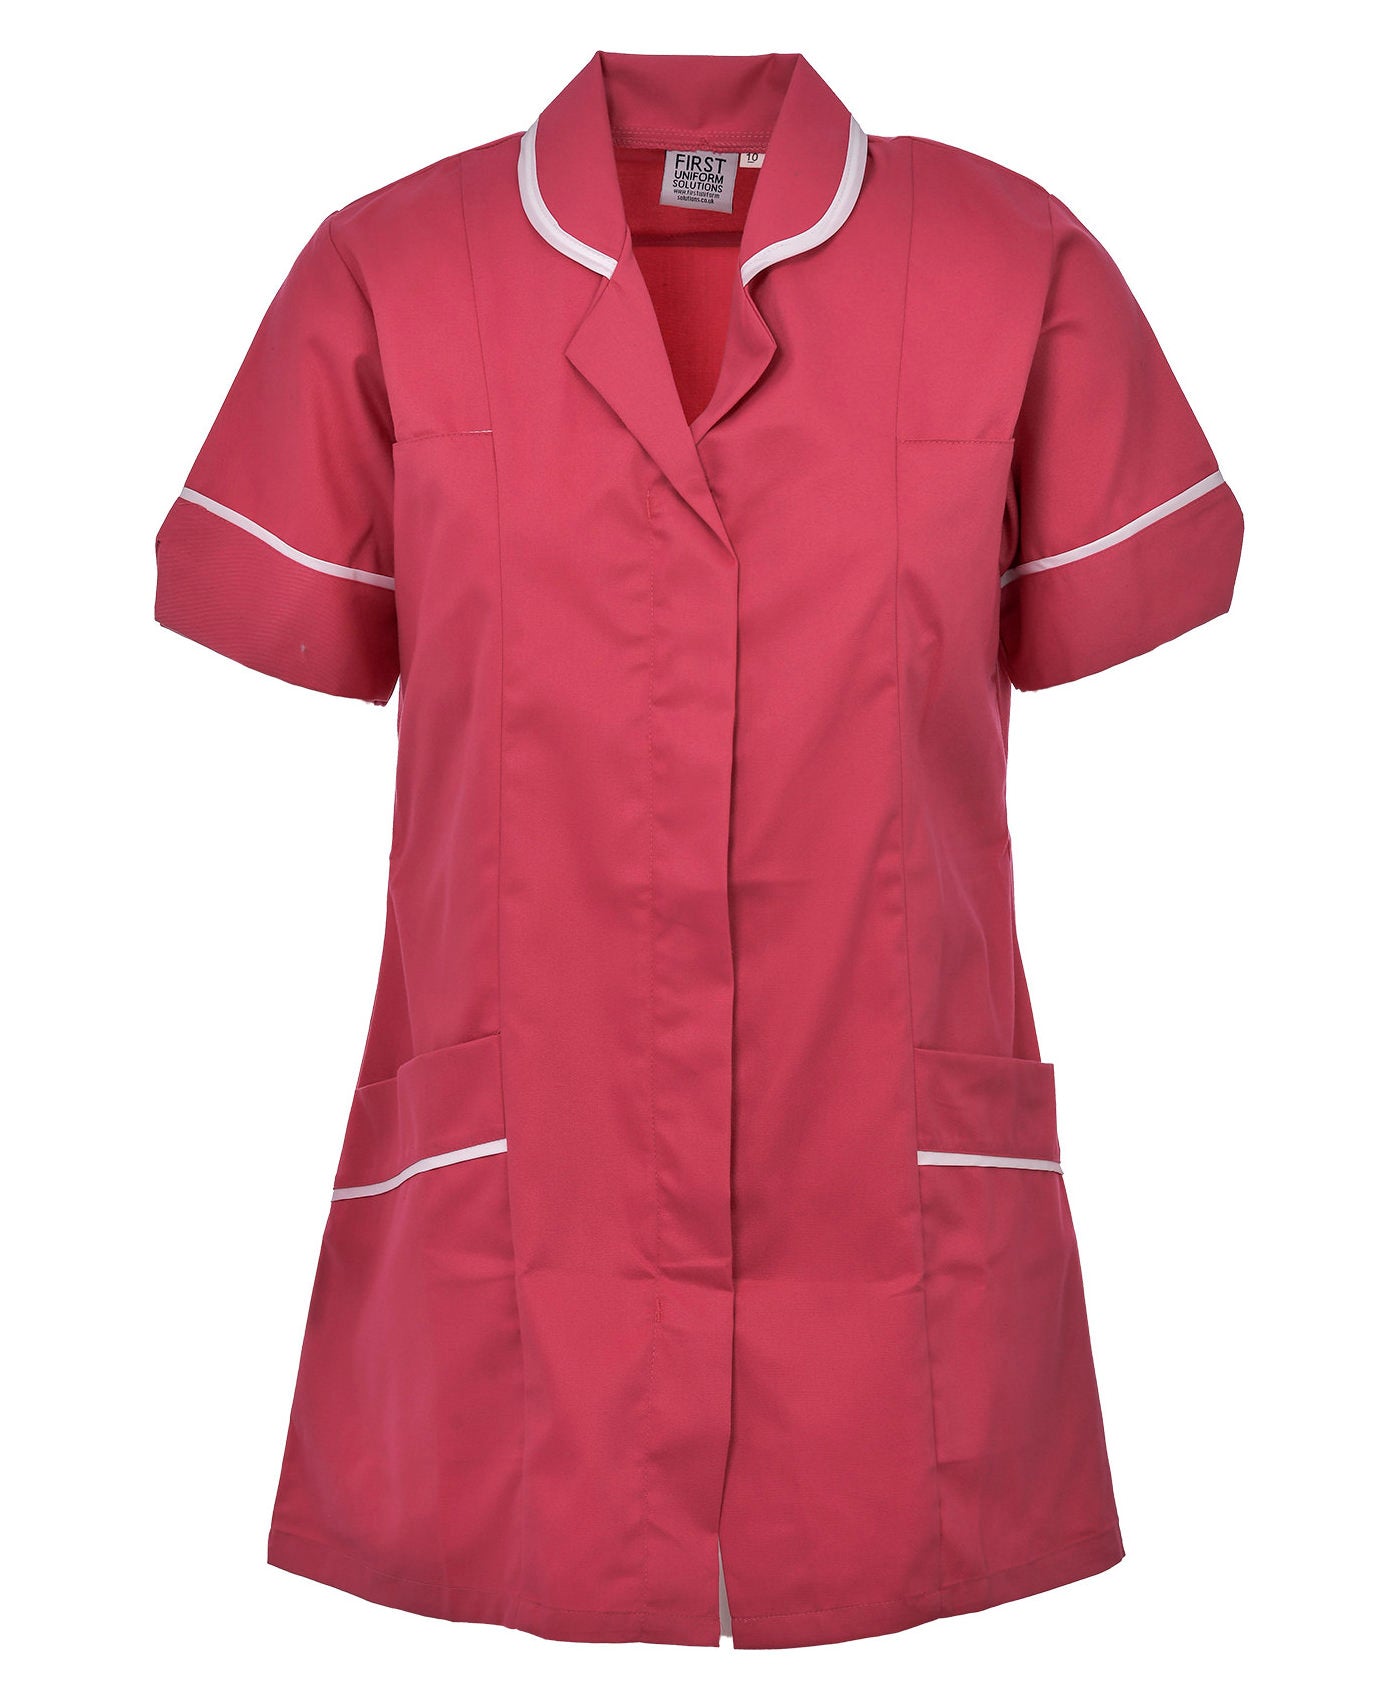 Women's Tunic Ideal for Nurses and Care Homes | Size 8 to 26 | FUL01 Rosetta